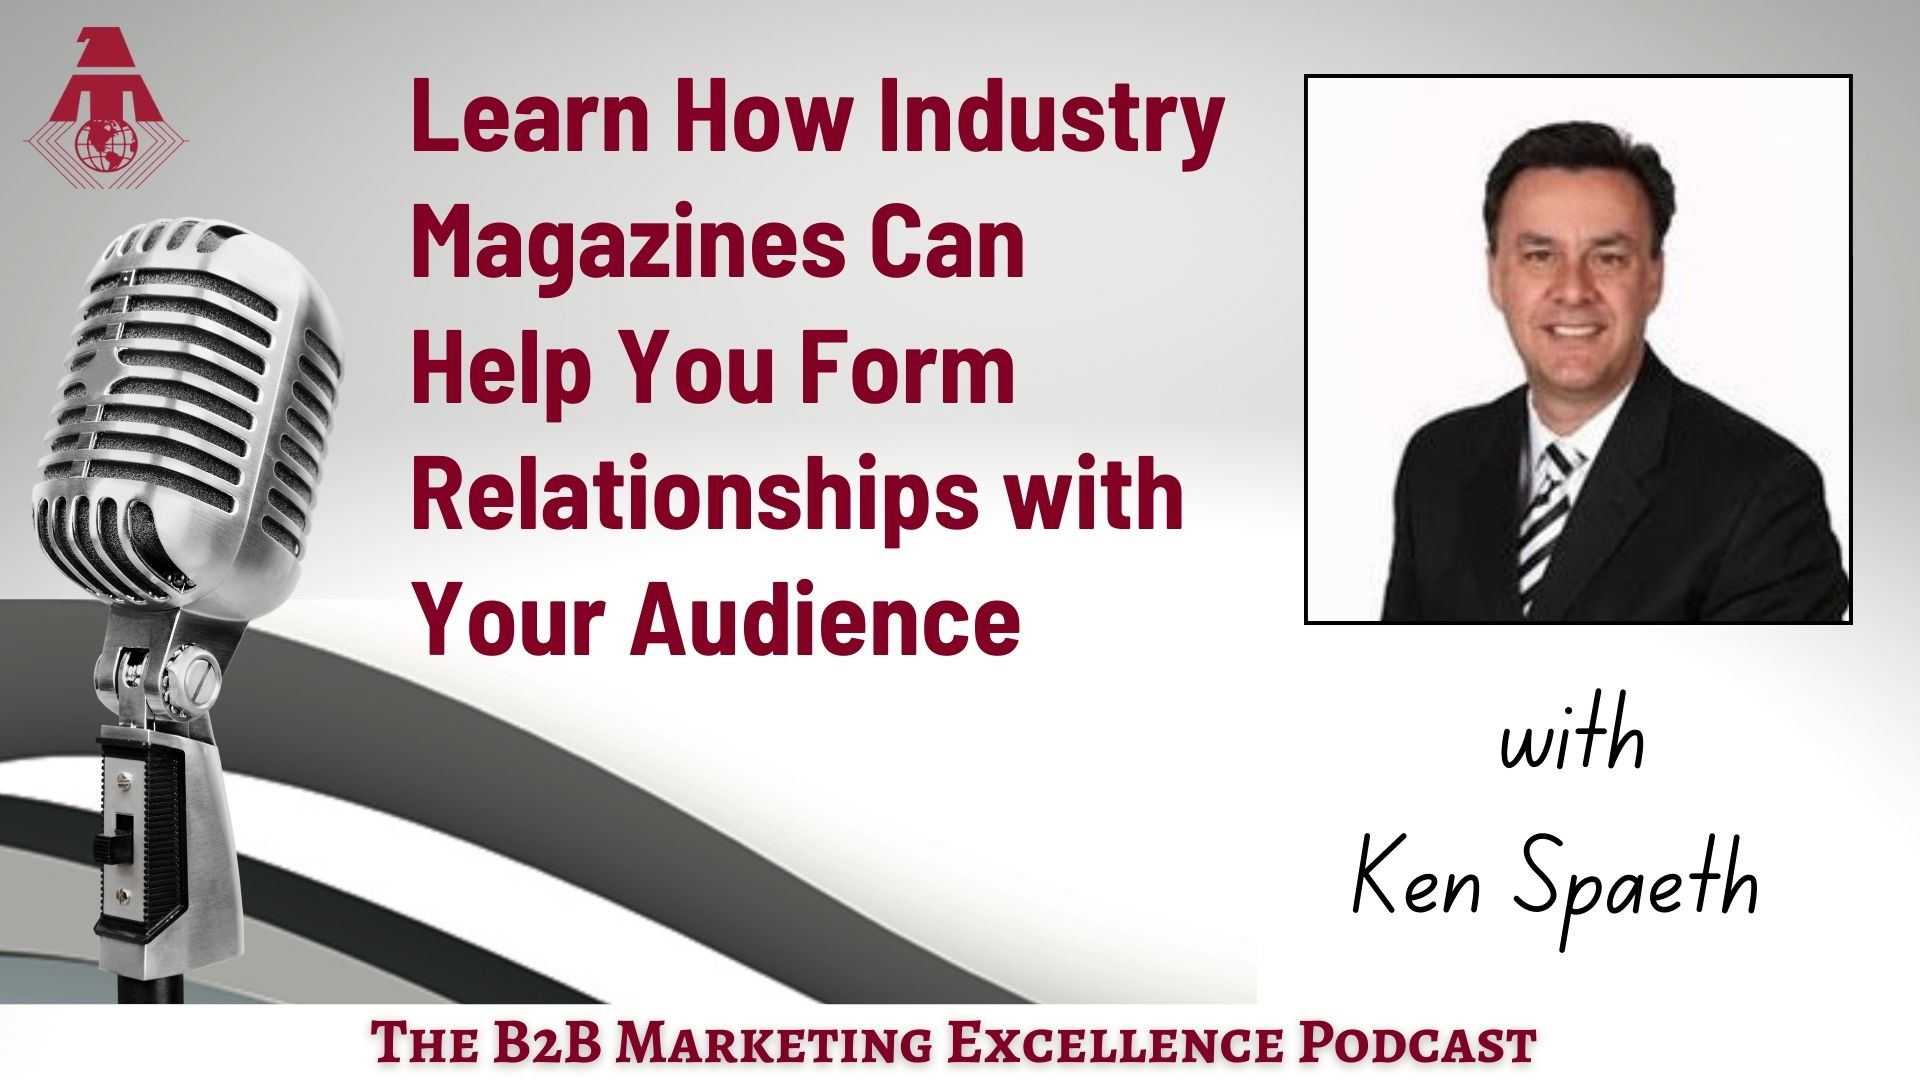 Podcast – Learn How Industry Magazines Can Help You Form Relationships With Your Audience